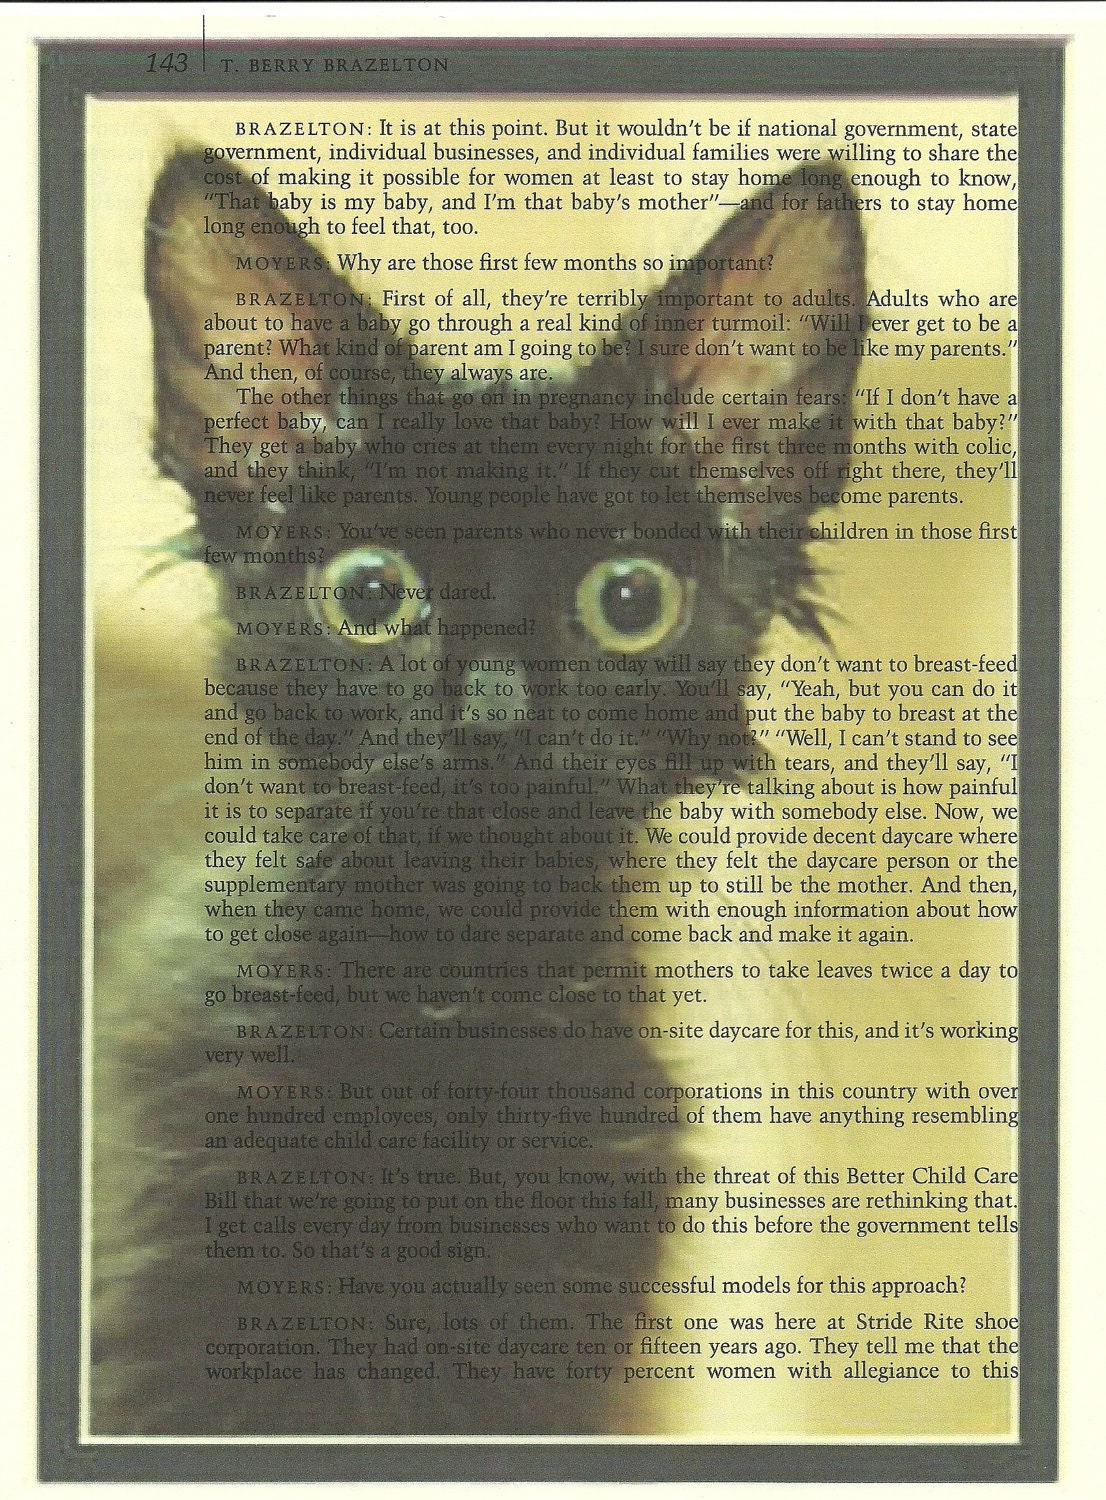 A Photo Of Fun Cat, Vernon Leroy Jones, is printed over a vintage book page. - HopeSpringsStudio